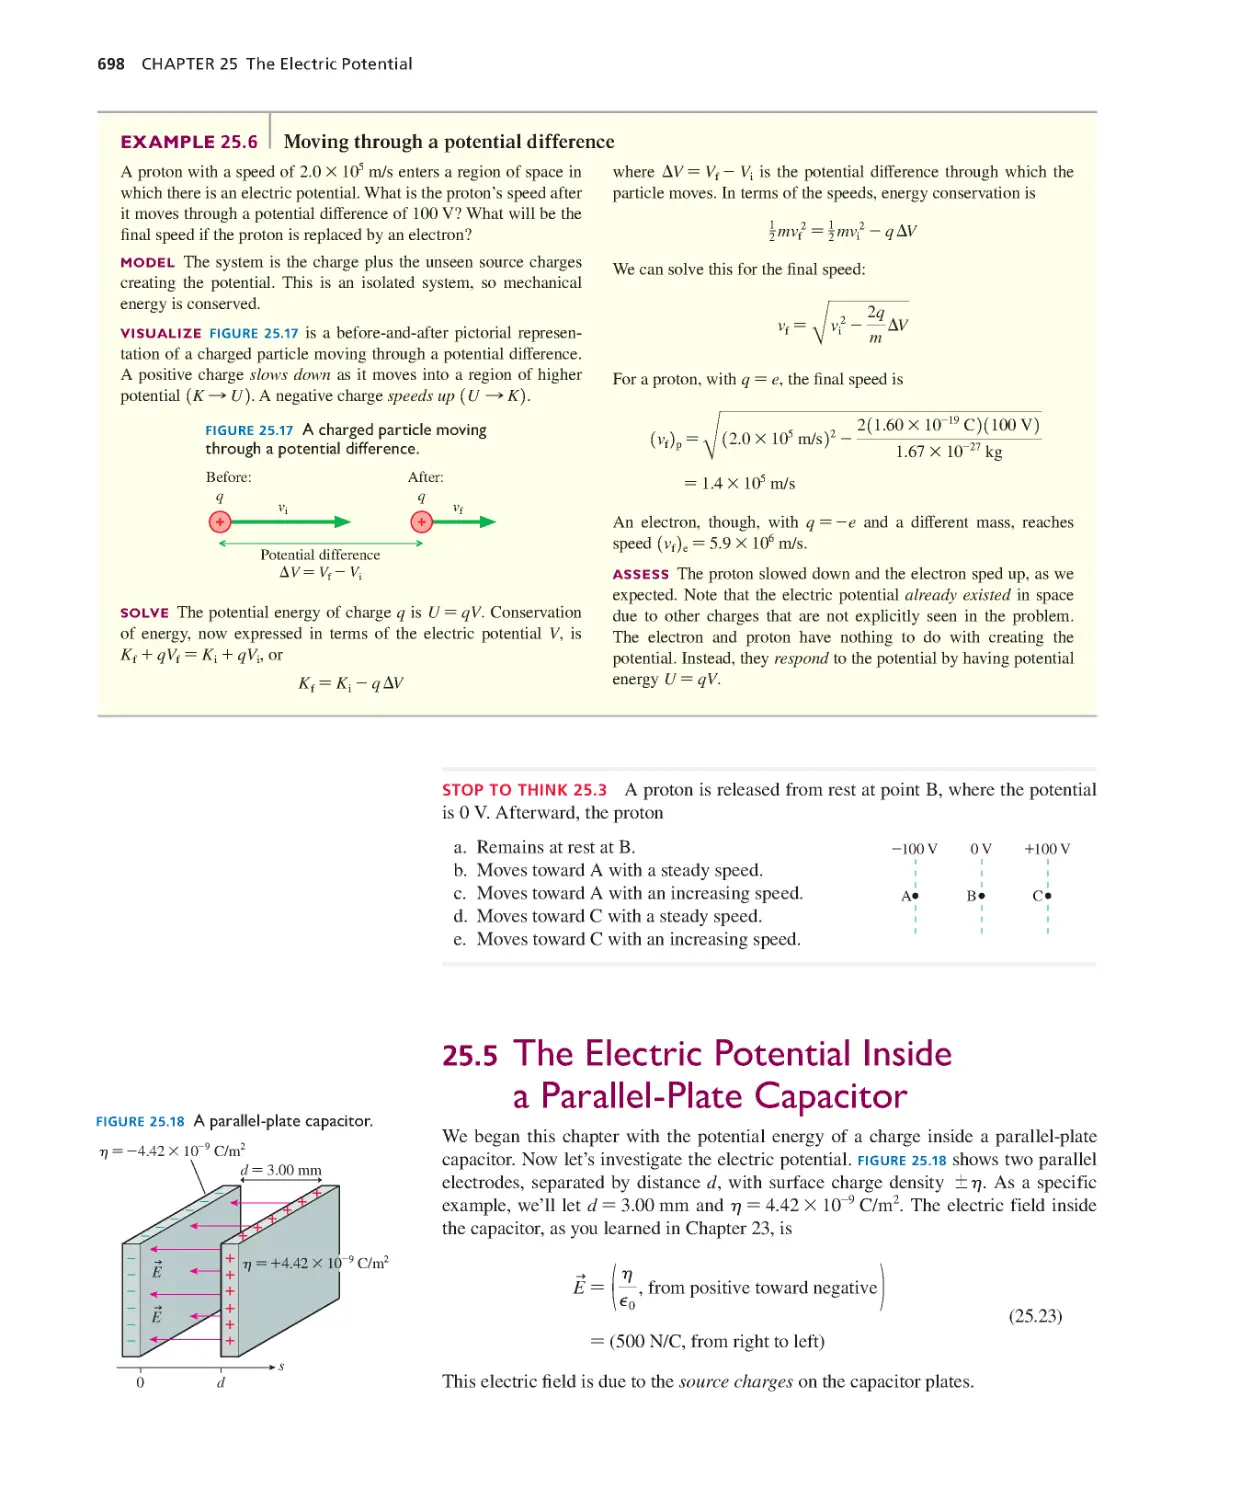 25.5. The Electric Potential Inside a Parallel- Plate Capacitor